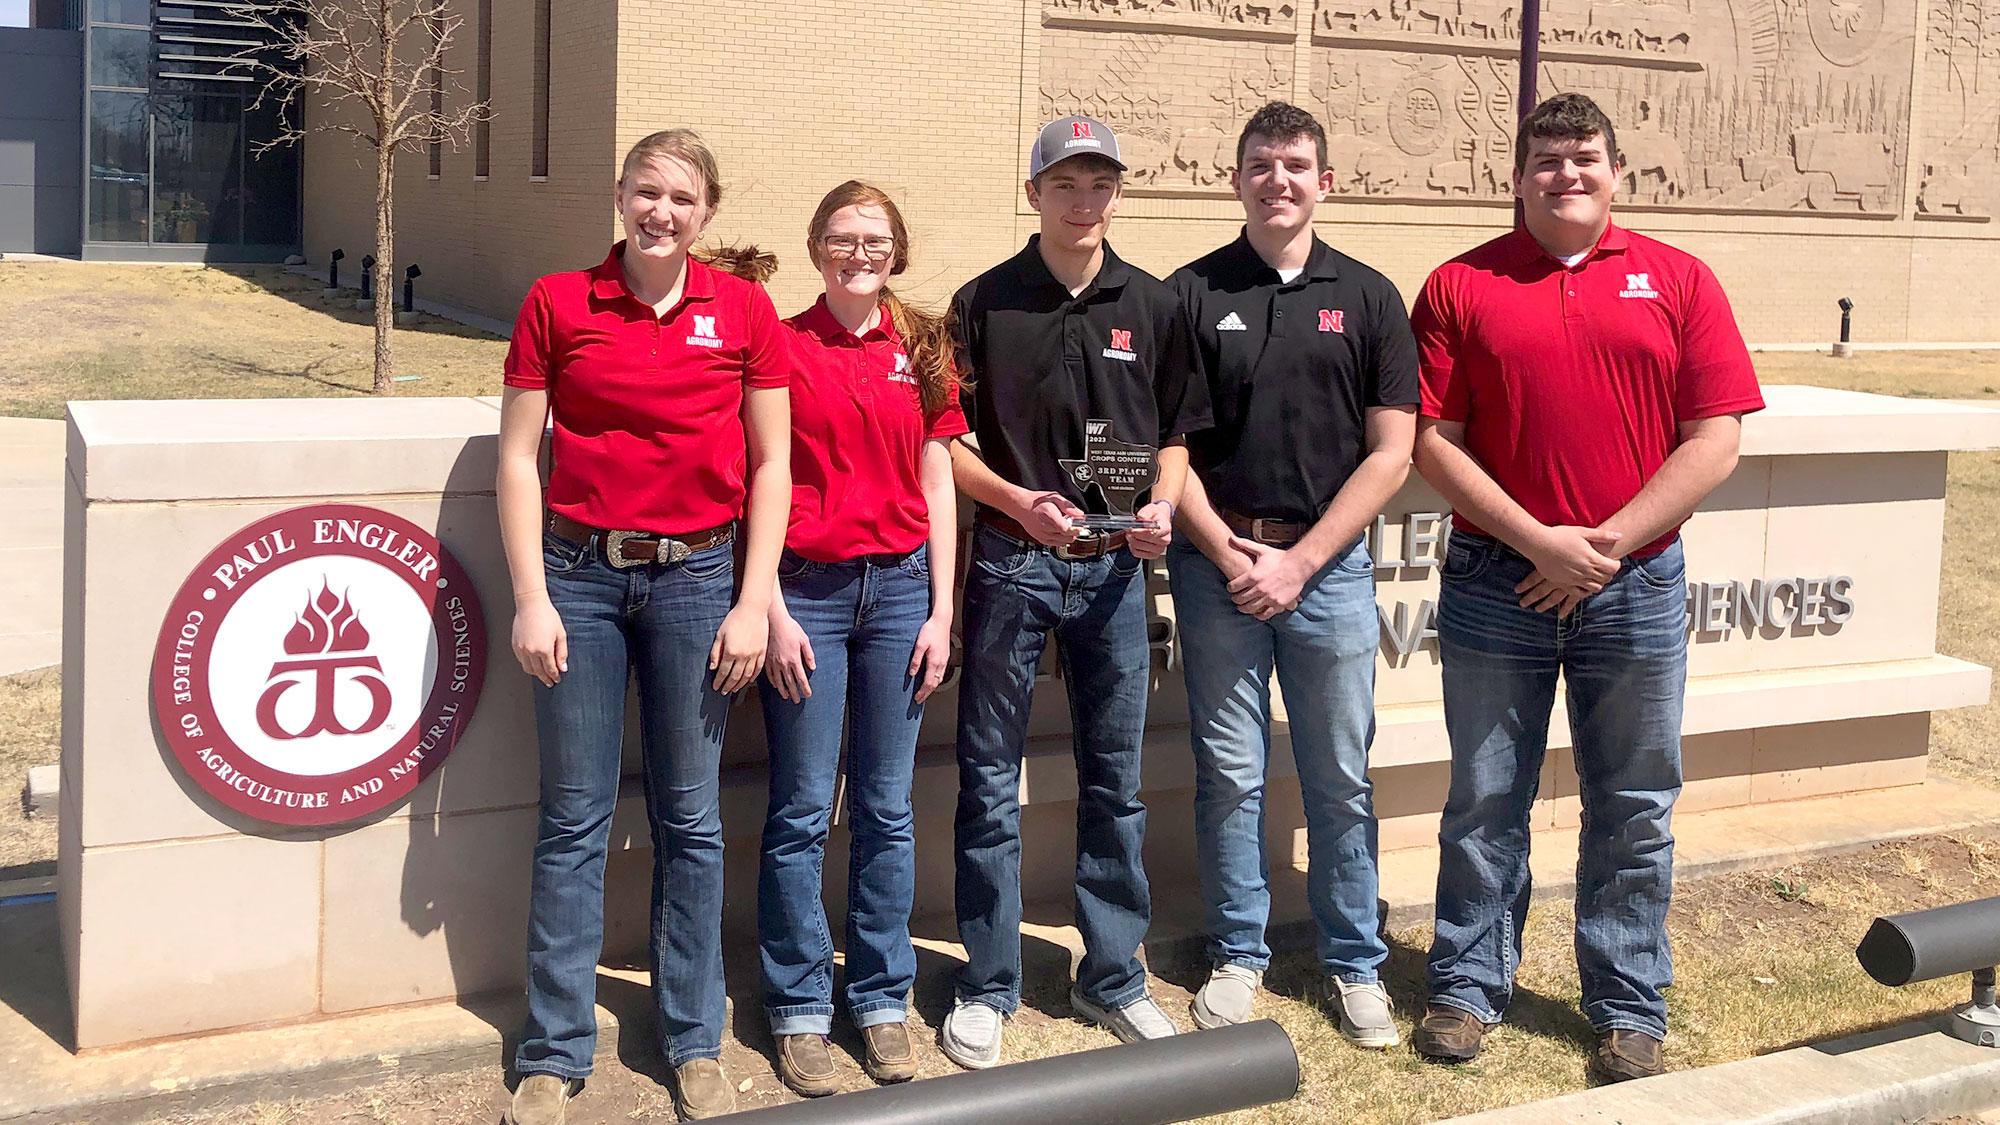 The University of Nebraska–Lincoln Crops Judging Team places third overall at the West Texas A&M University Collegiate Crops Contest on March 25 in Canyon, Texas. Team members include Kailey Ziegler (from left), Maggie Walker, Will Stalder, Zach Nienhuese